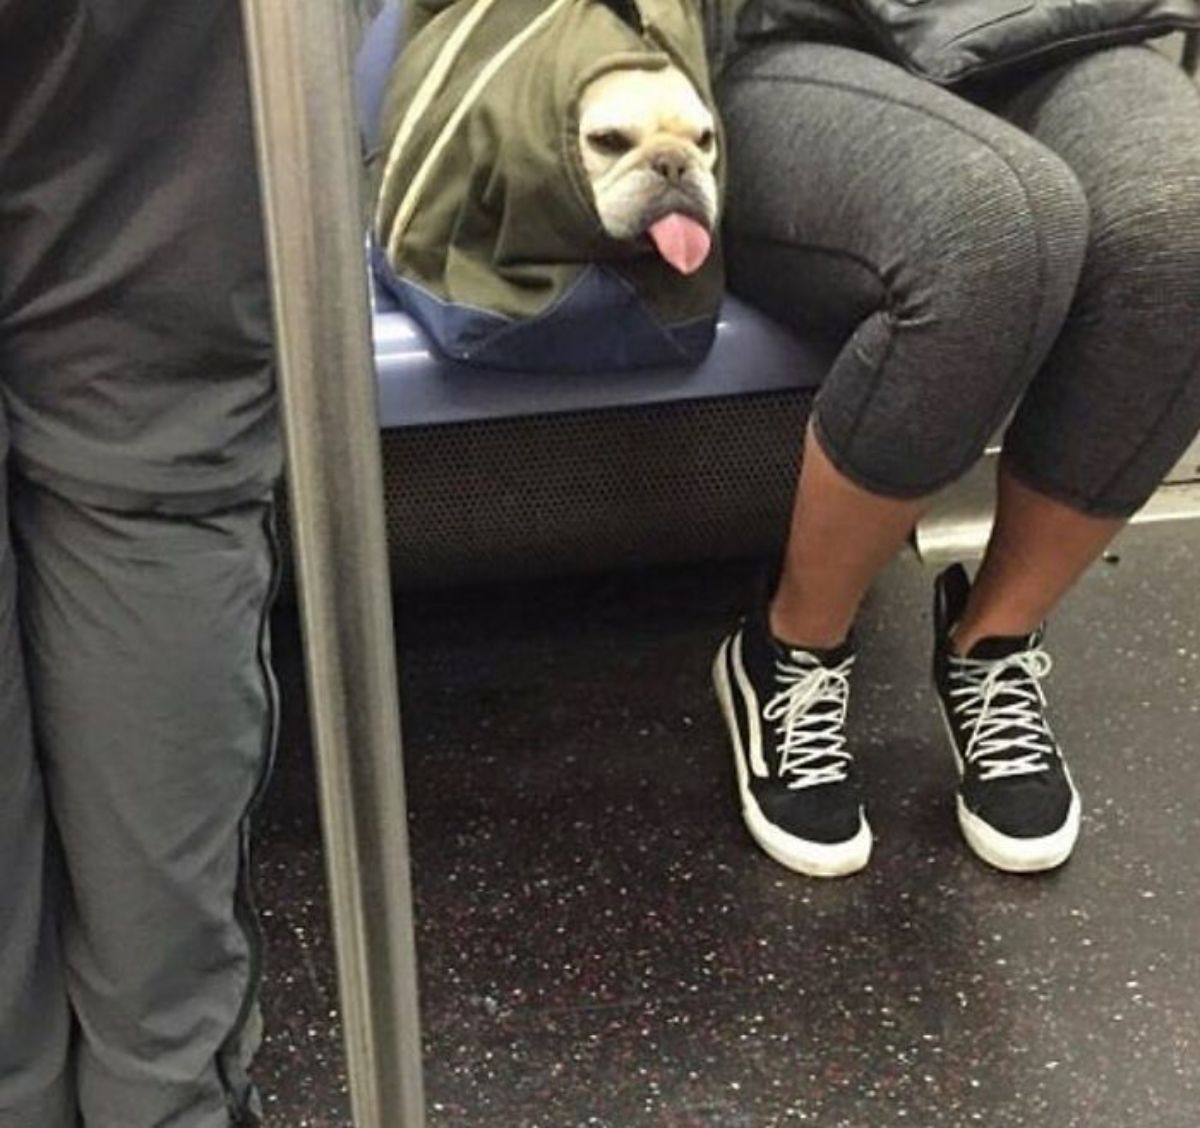 white dog's head sticking out of a green and blue bag on a plastic seat on public transport